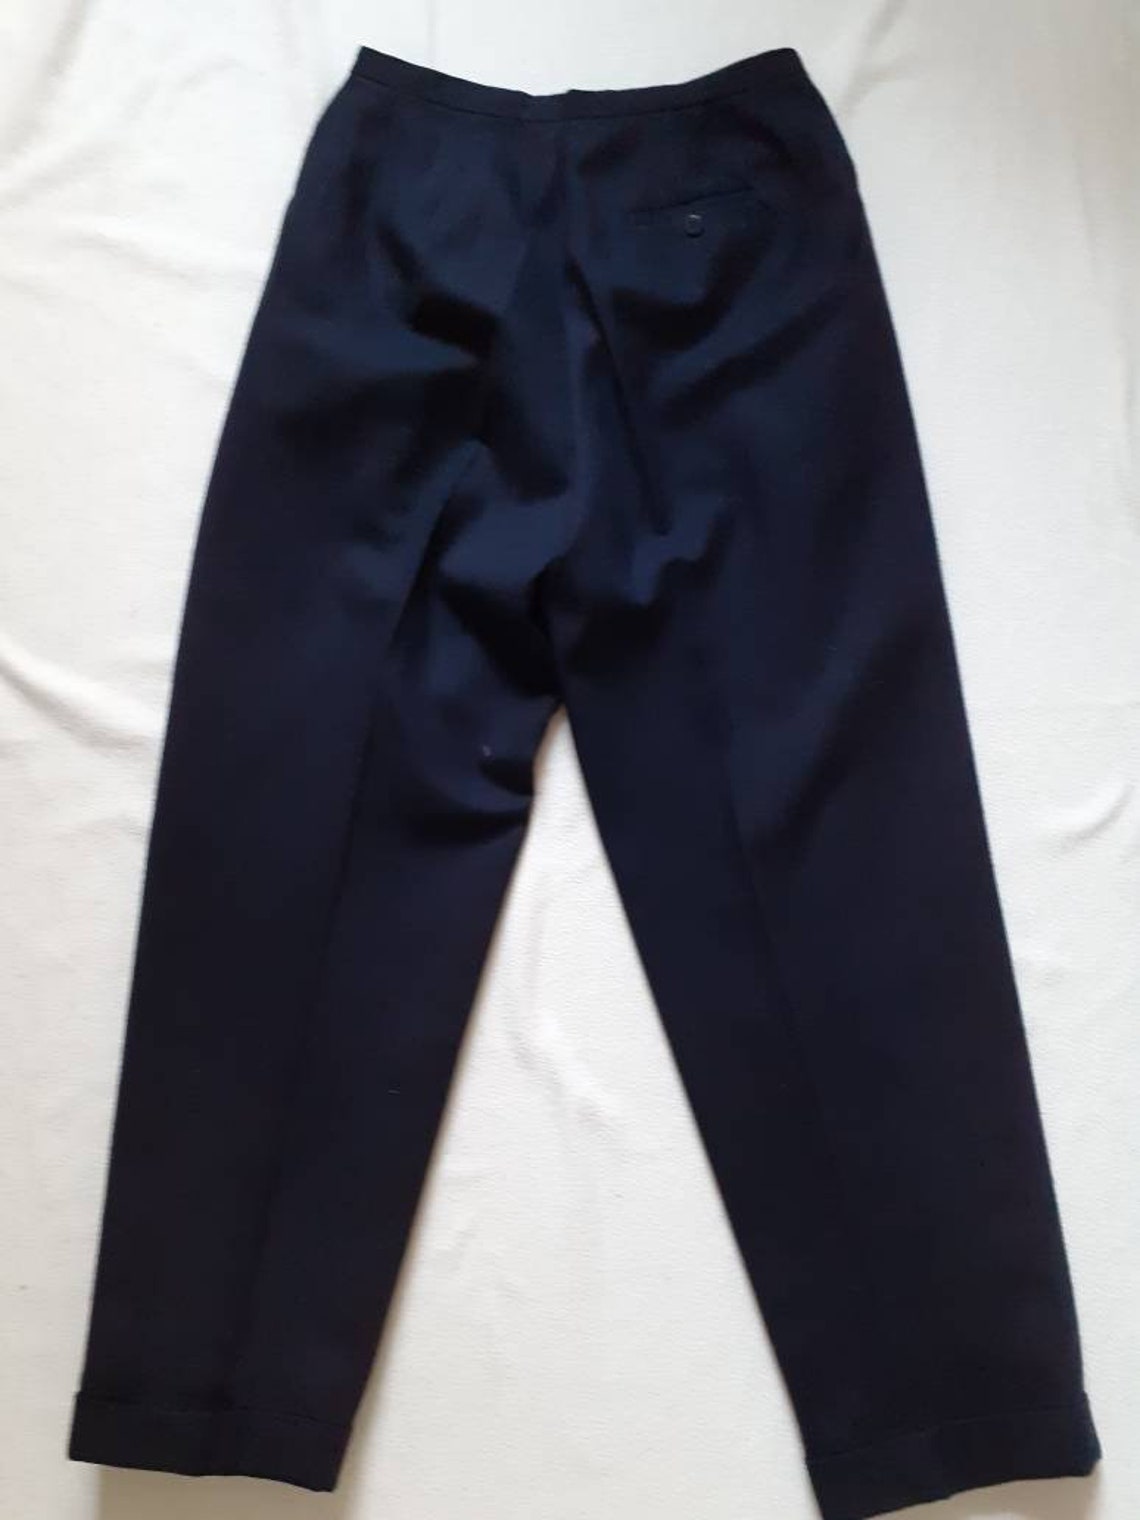 Vintage navy blue classic baggy tailored wool suit trousers | Etsy